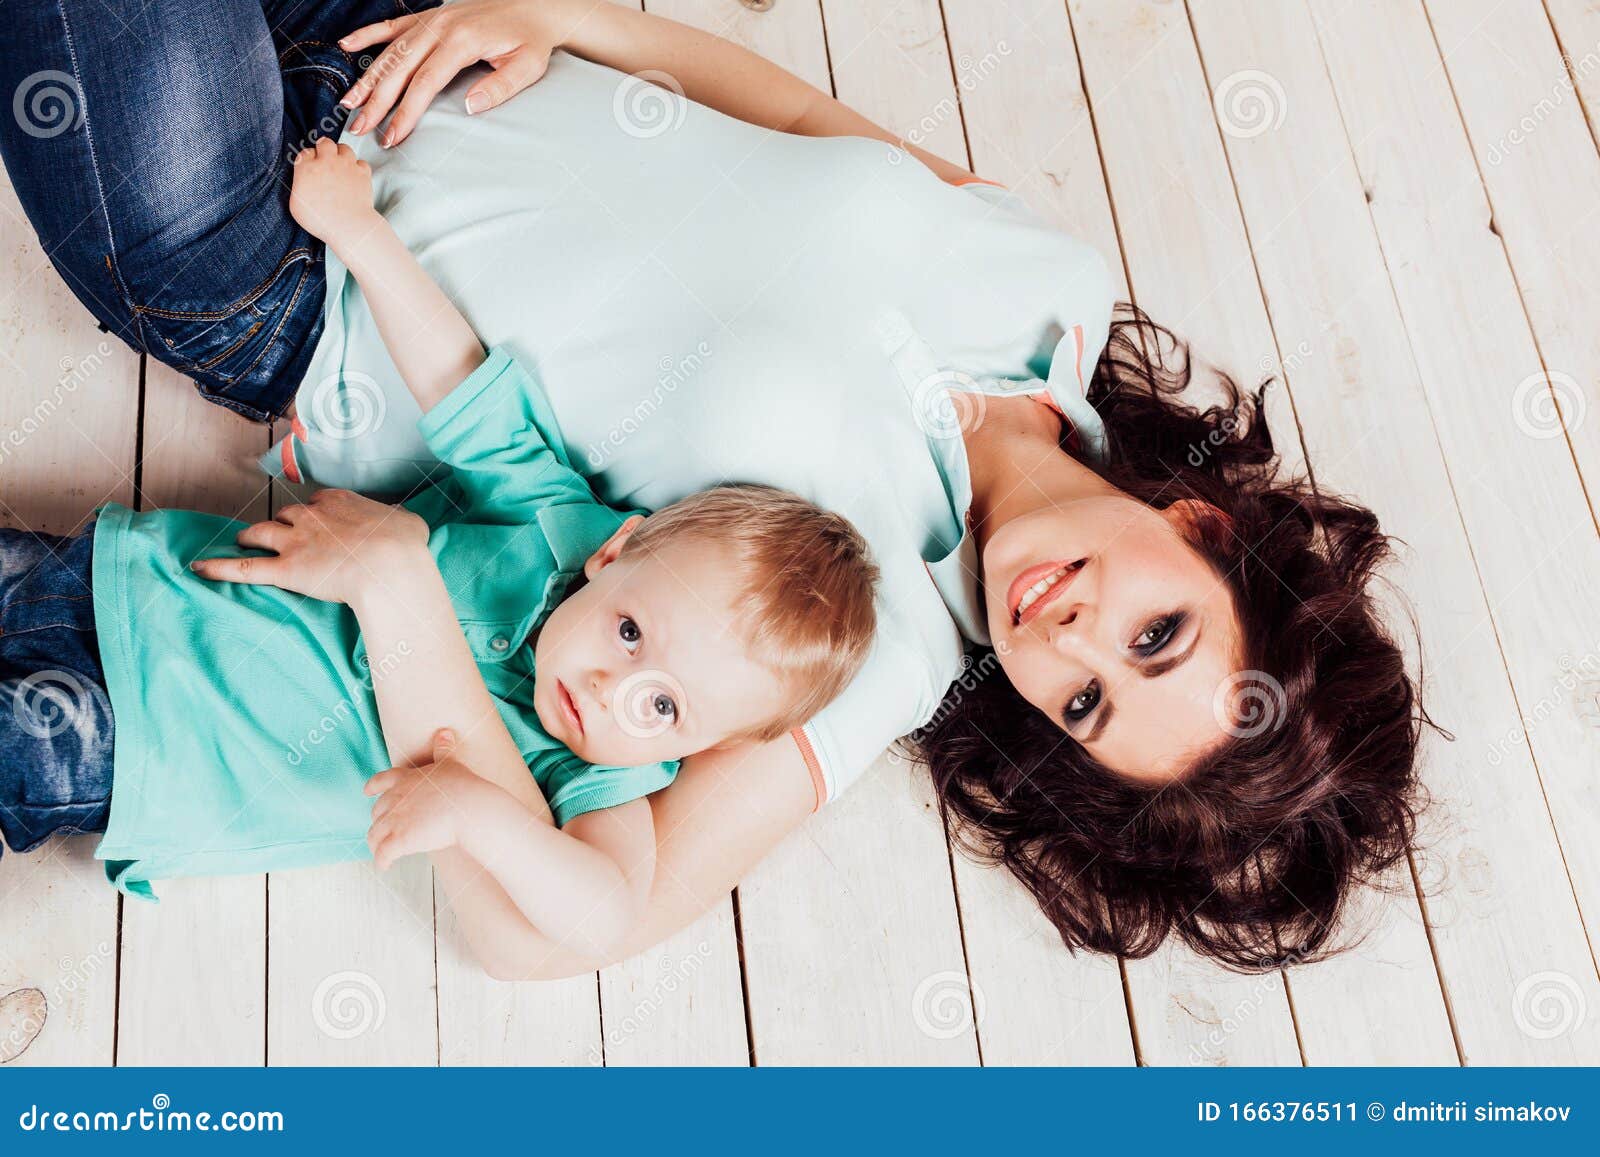 Mom And Young Boy Son Lying On The Wooden Floor Stock Image